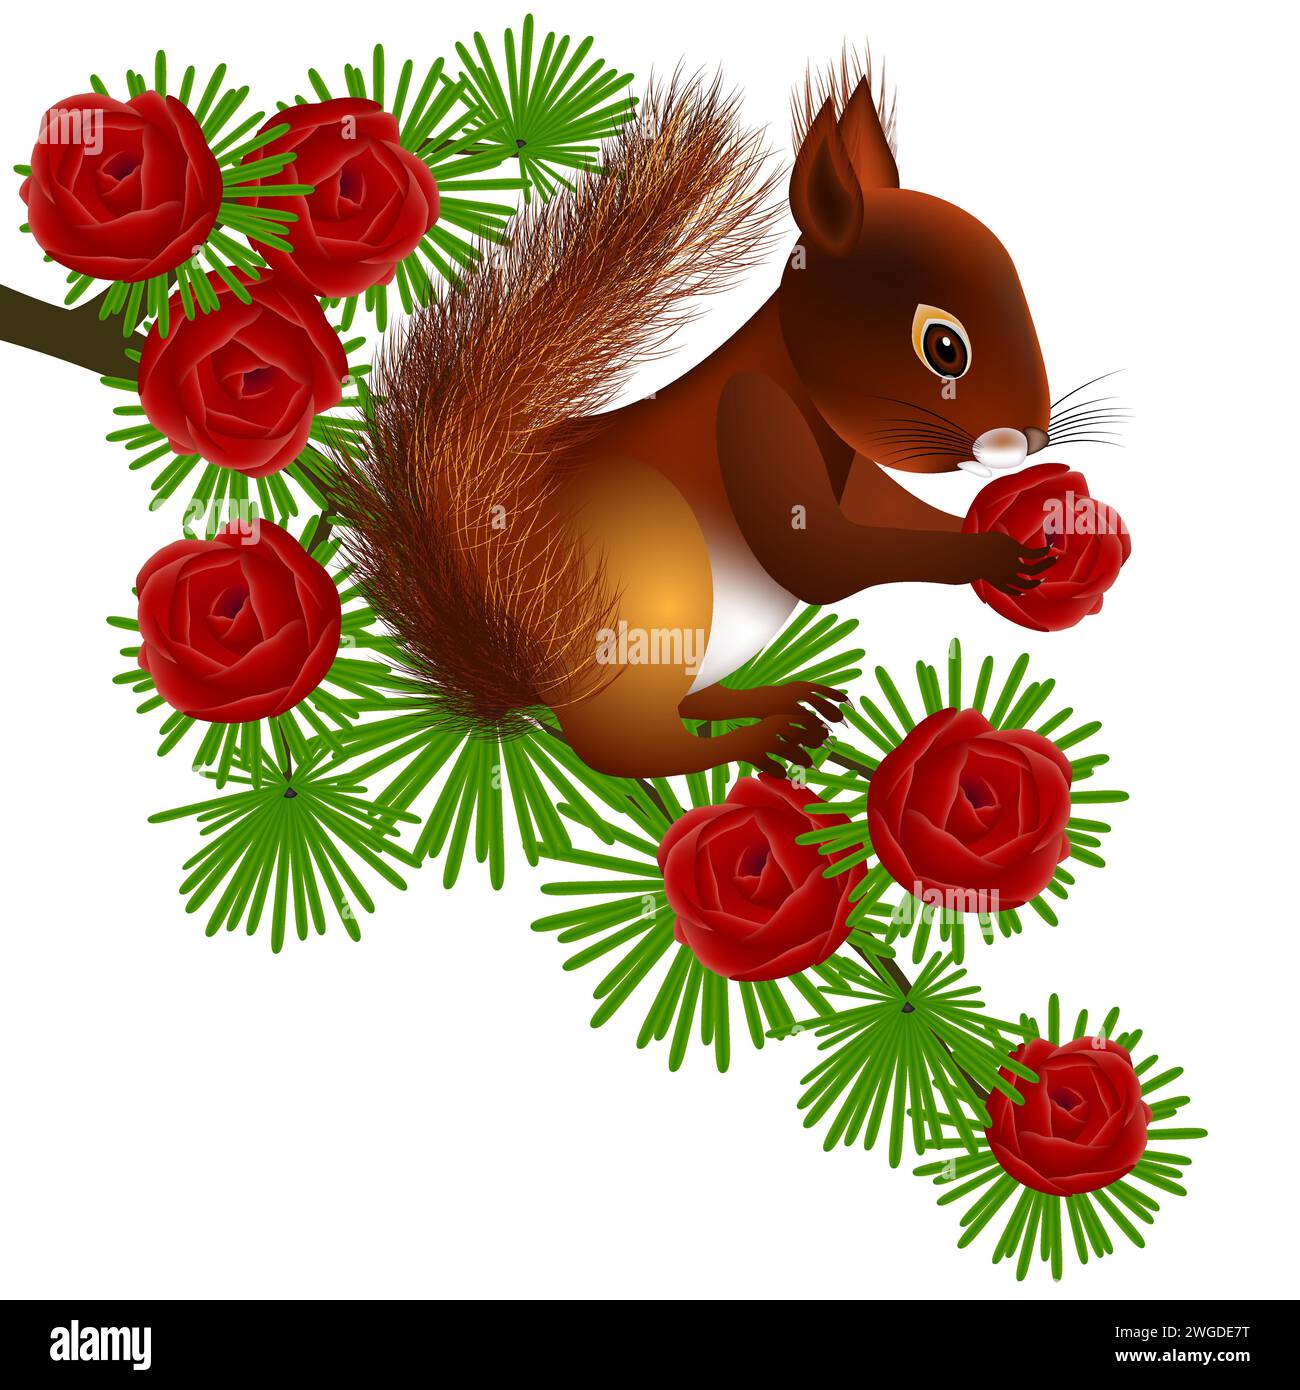 Squirrel on dahurian gmelin larch branch with cones on a white background. Stock Vector